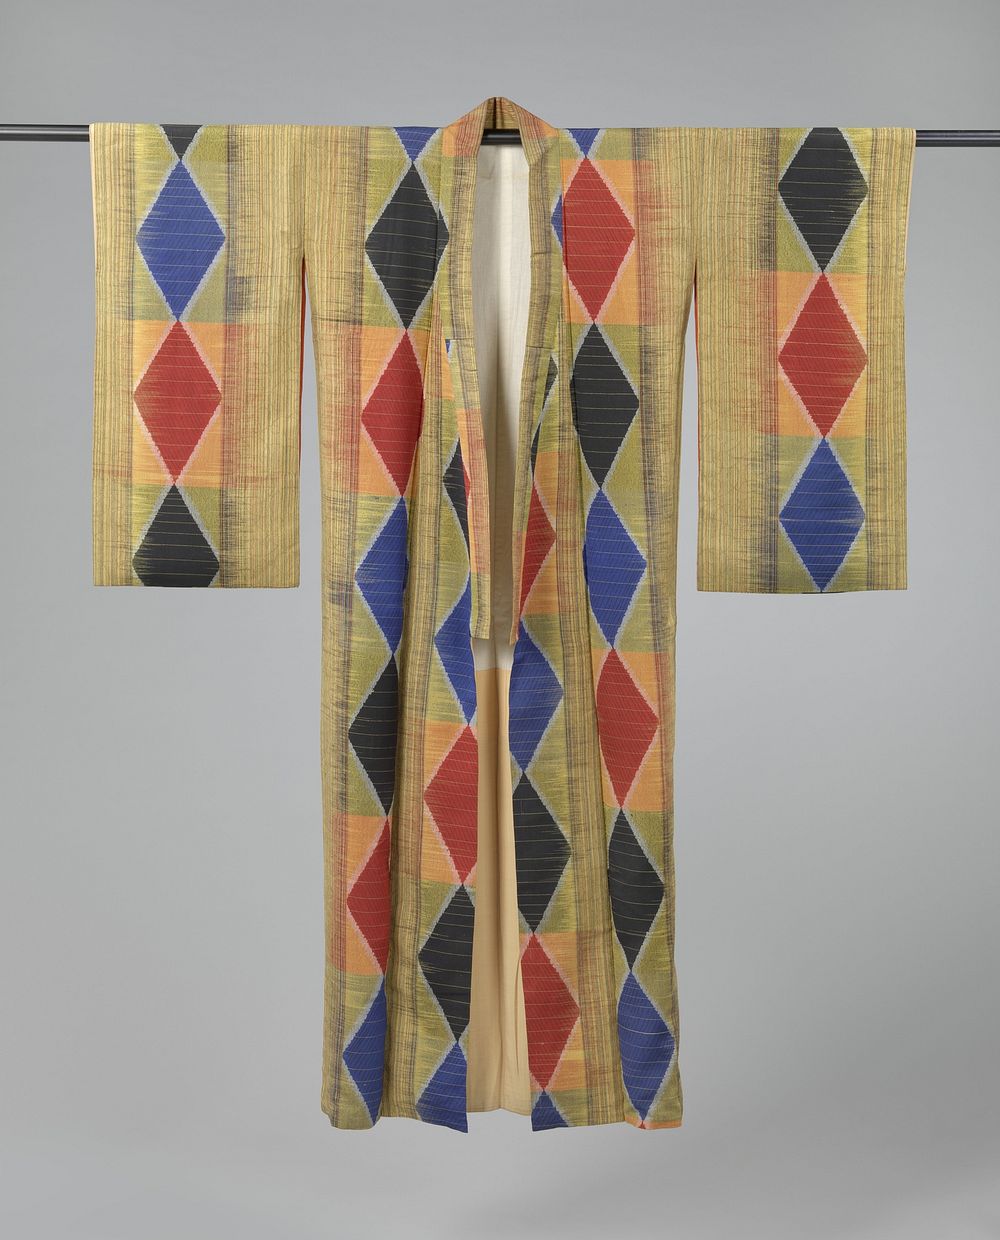 Women’s kimono decorated with geometric patterns (c. 1920 - c. 1940) by anonymous